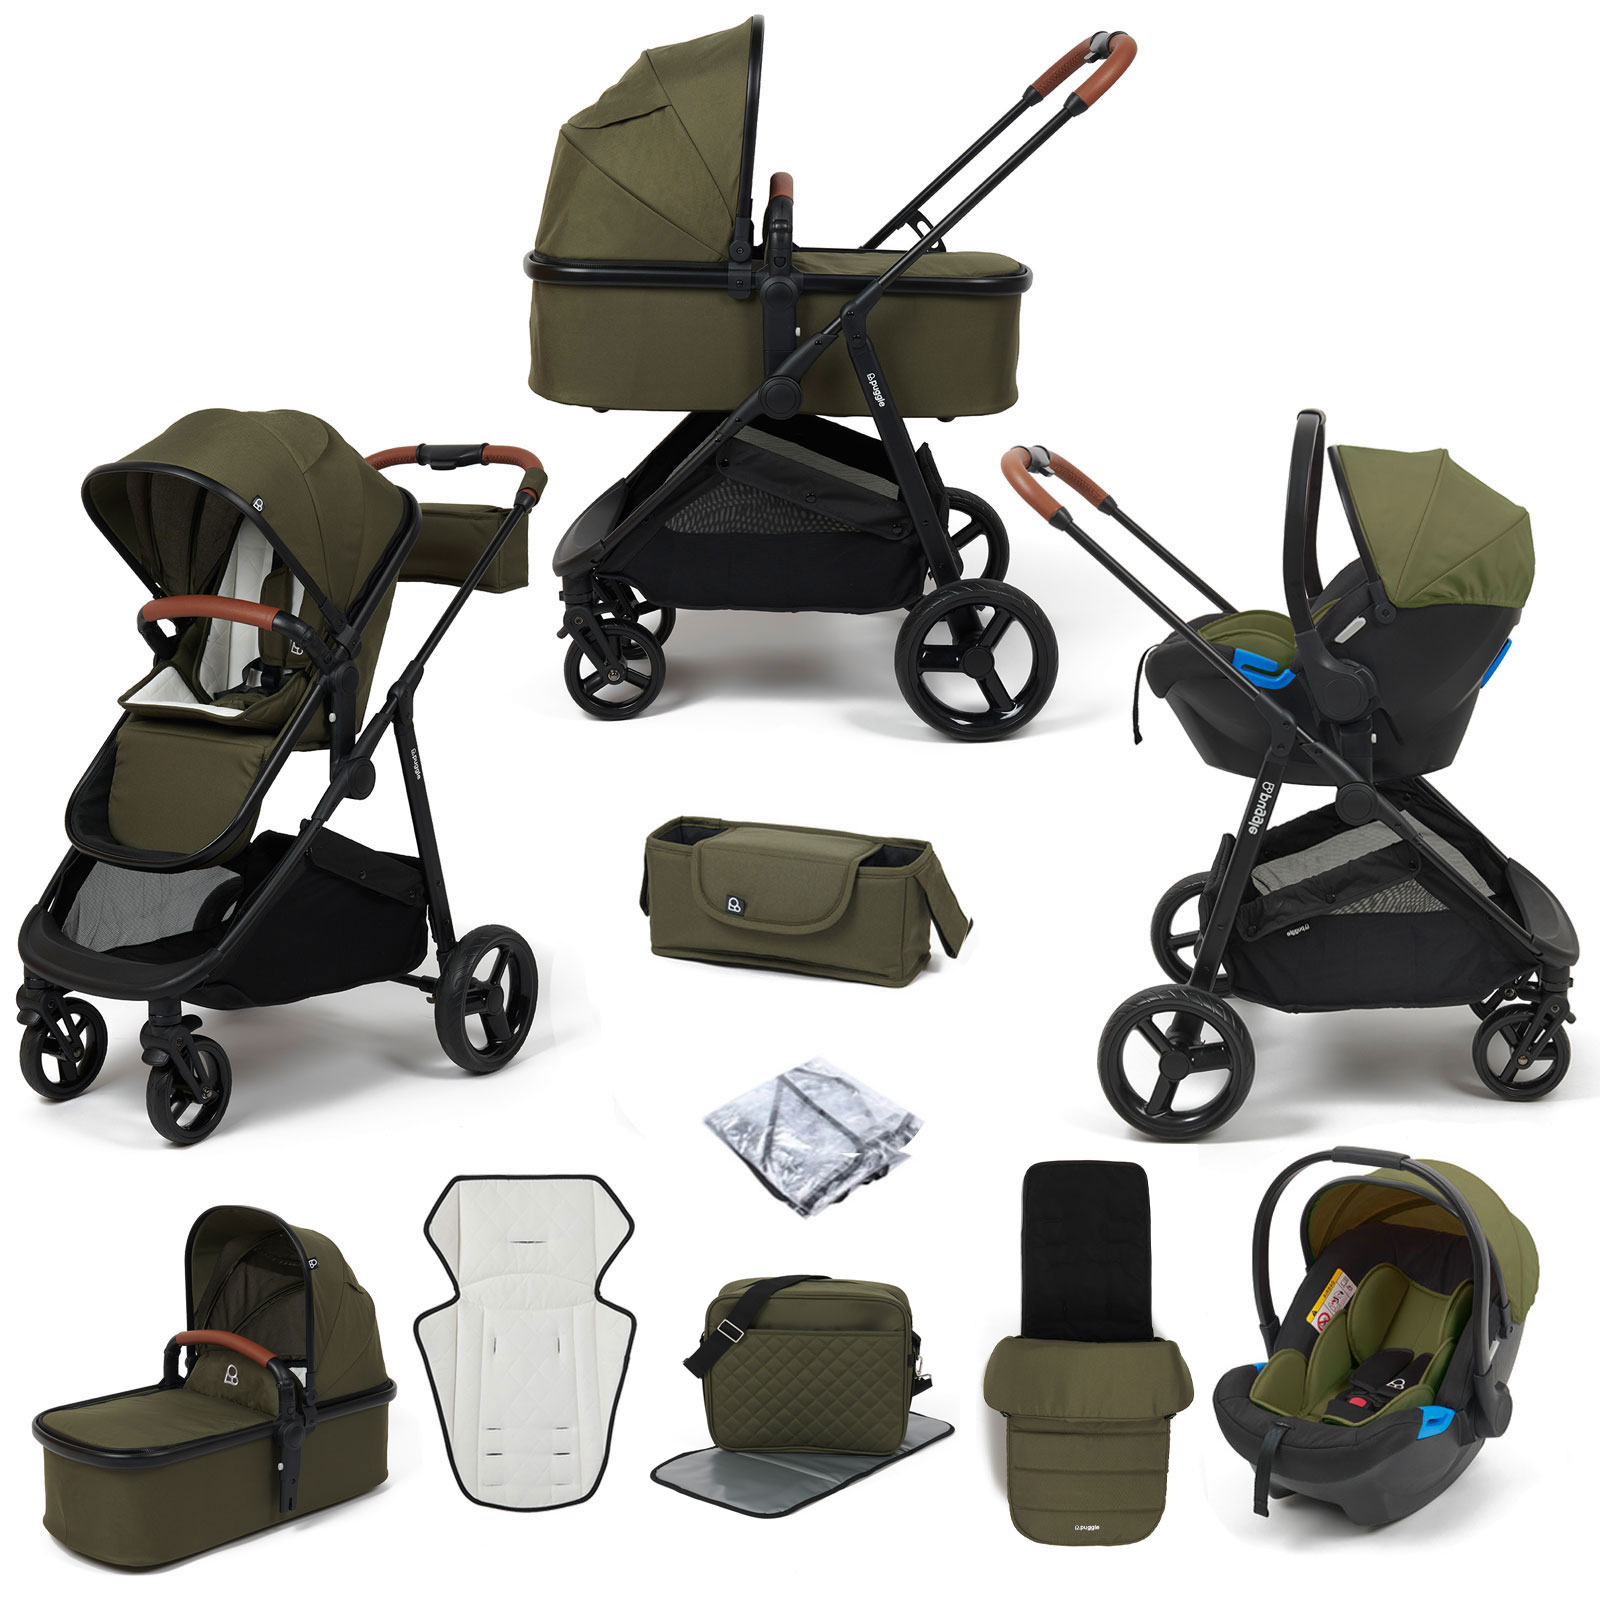 Puggle Monaco XT 3in1 Travel System with Organiser, Footmuff & Changing Bag - Forest Green